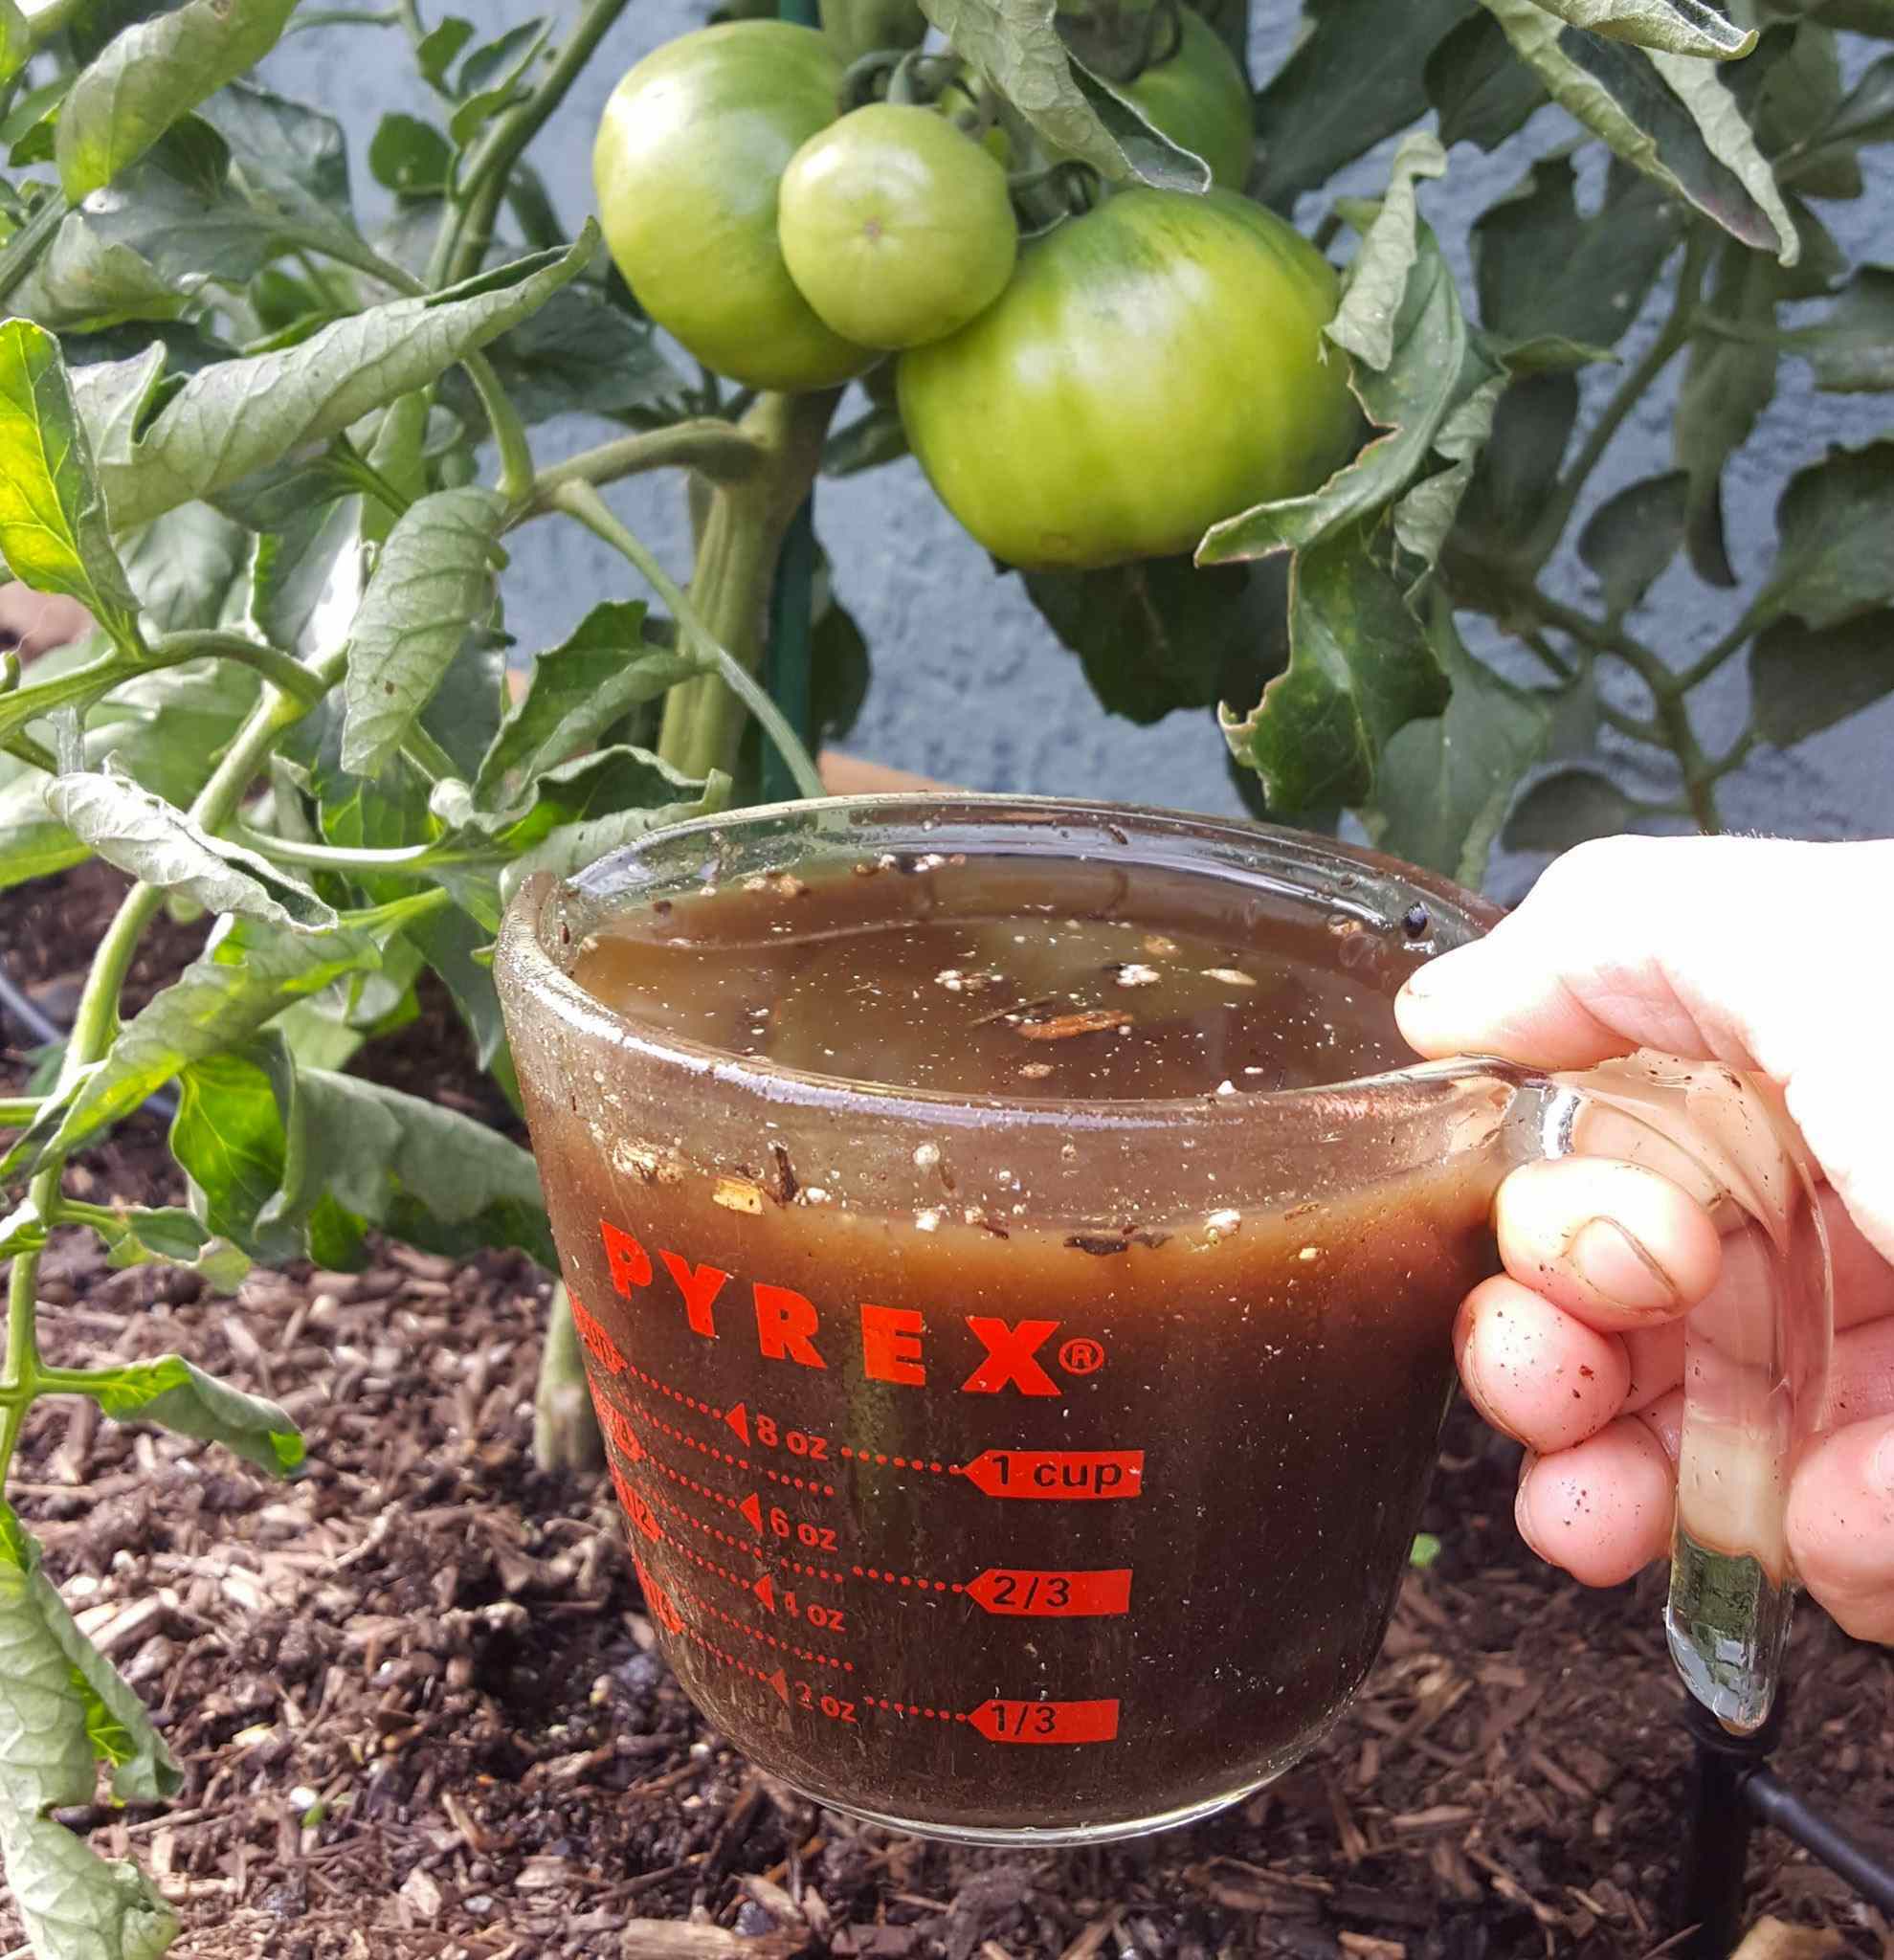 A hand is shown holding a one cup glass liquid measuring cup full of worm compost tea along the soil line of a raised bed. Tomato plants are visible in the background which are the target plants of the worm compost tea application. 